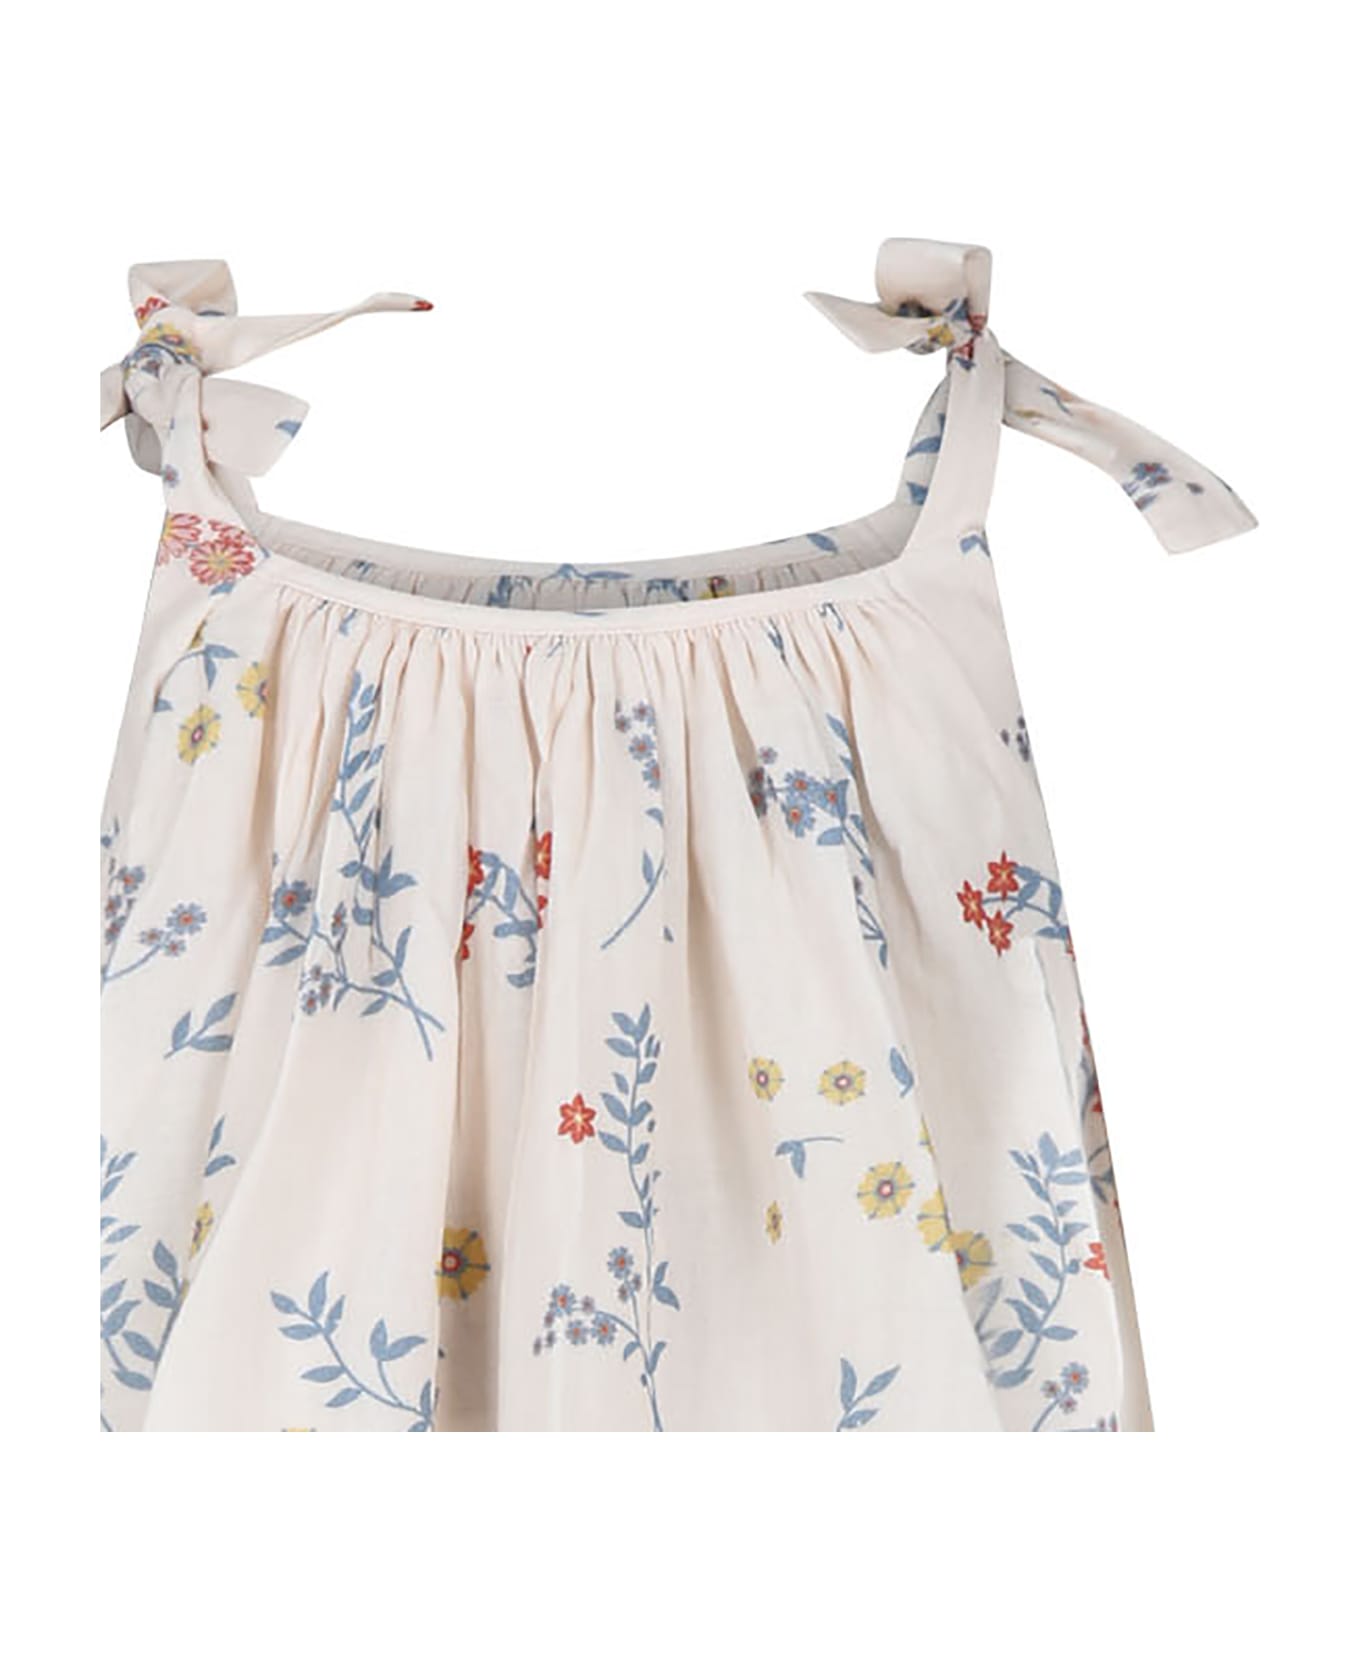 Coco Au Lait Ivory Dress For Girl With Flowers Print - Ivory